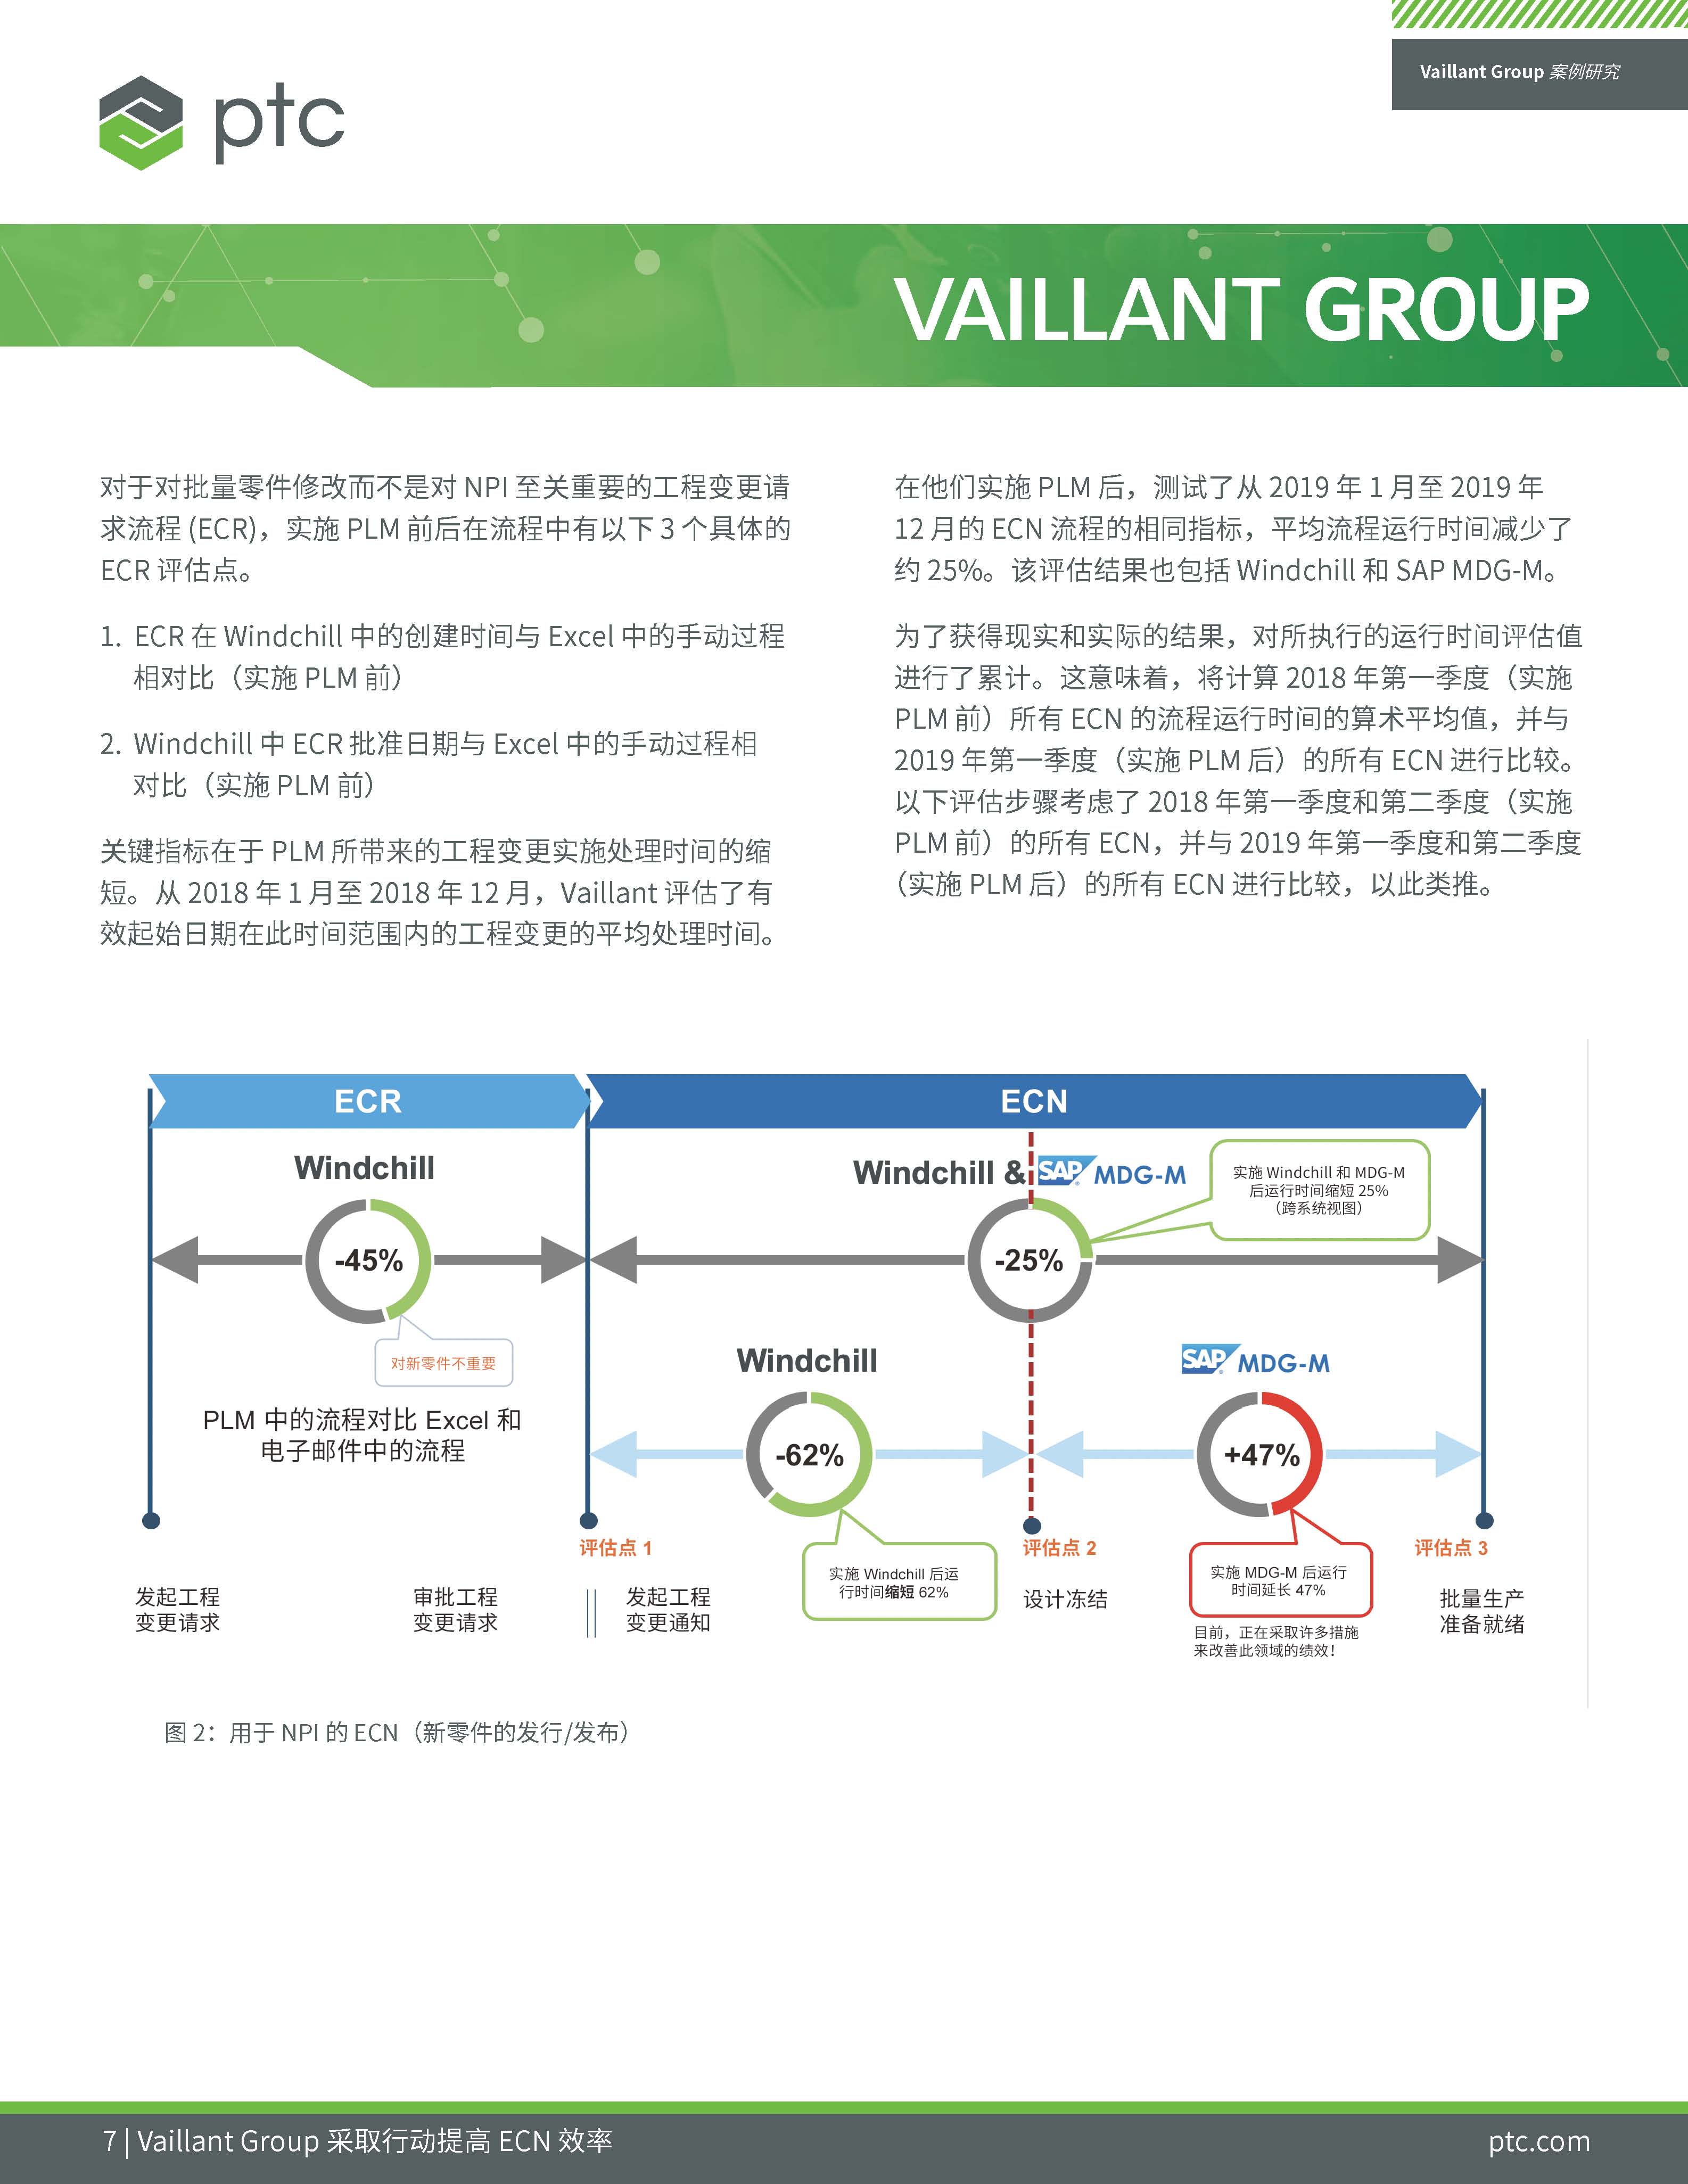 Vaillant Group's Digital Transformation (Chinese)_页面_07.jpg